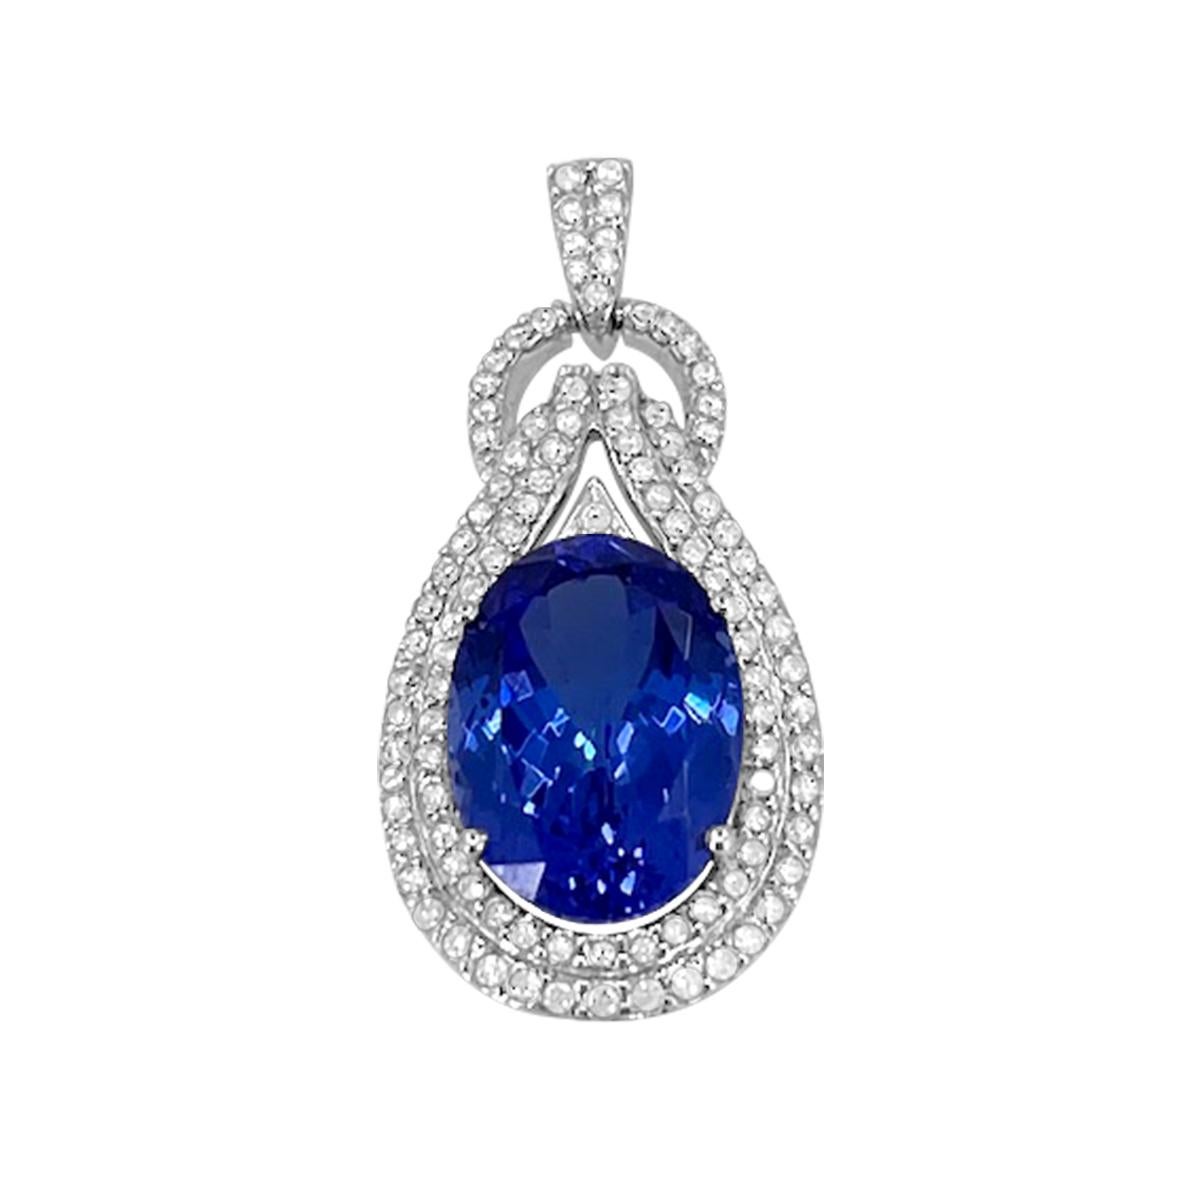 Tanzanite is one of the rarest stones. It is a member of the zoisite family, but is unique because of its striking blue/violet colour. Tanzanite is uniquely trichroic. This means that in its rough form, it radiates three different colours from each